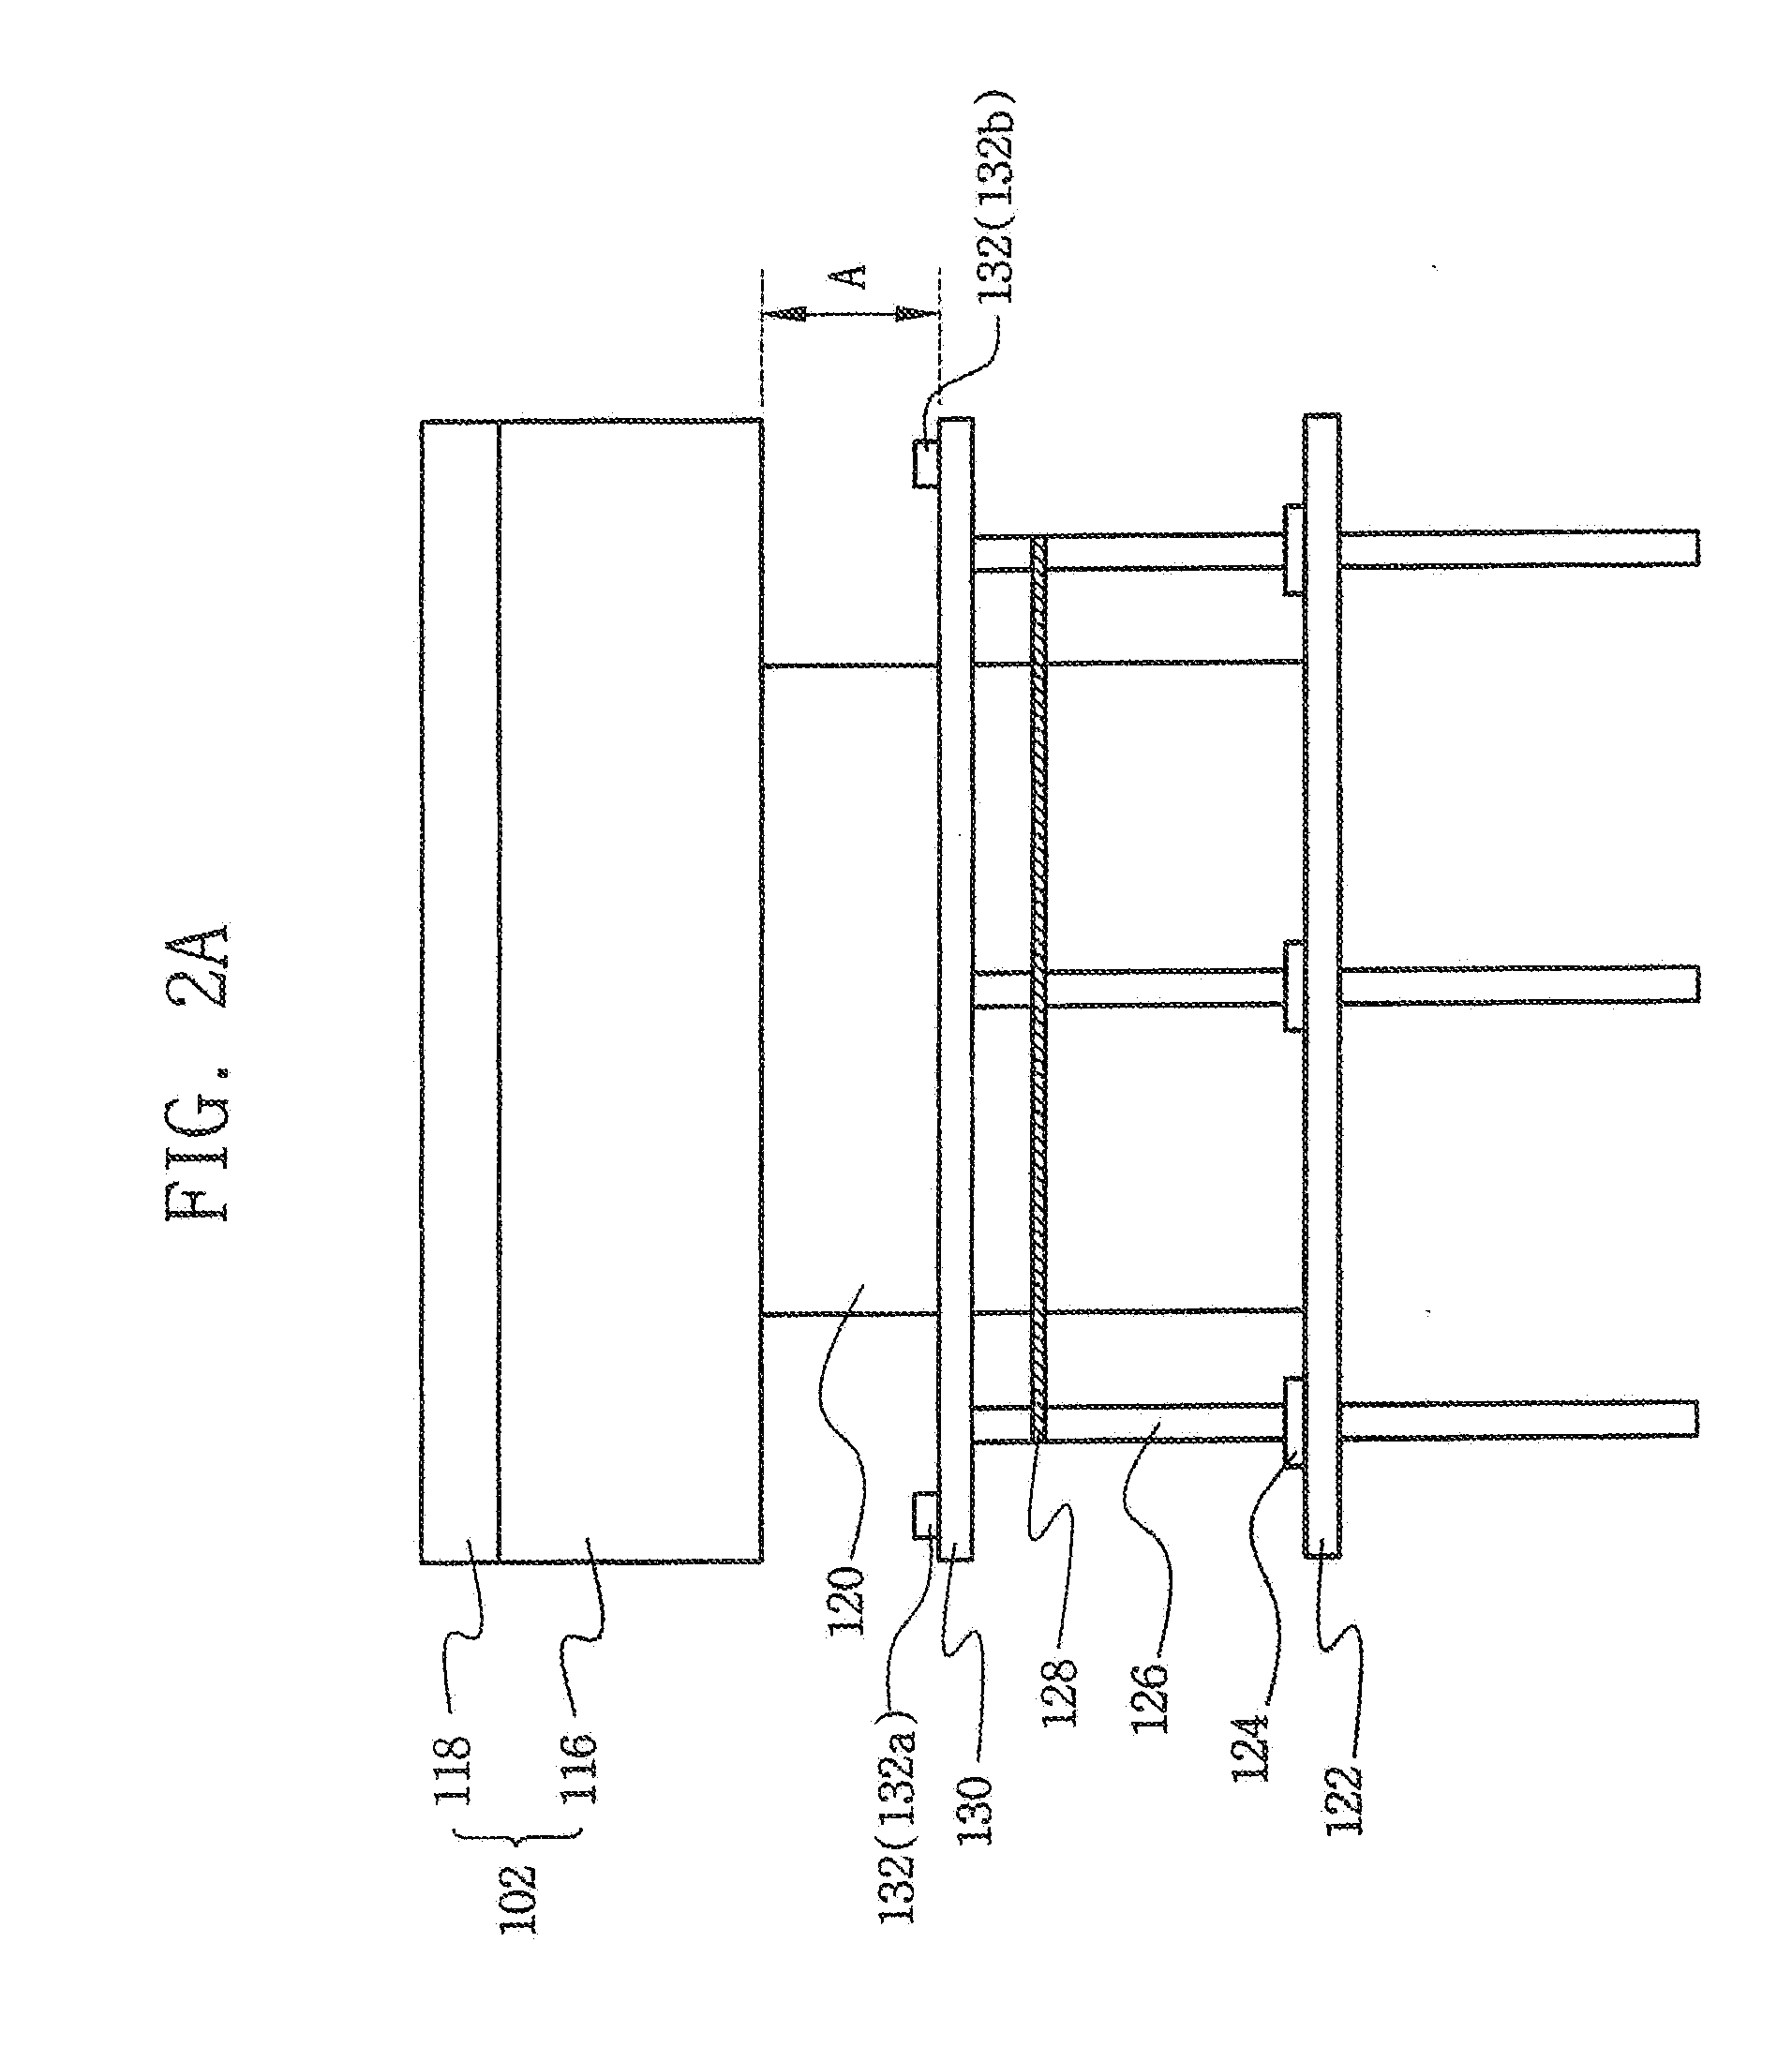 Apparatus and method for sensing the position of a susceptor in semiconductor device manufacturing equipment